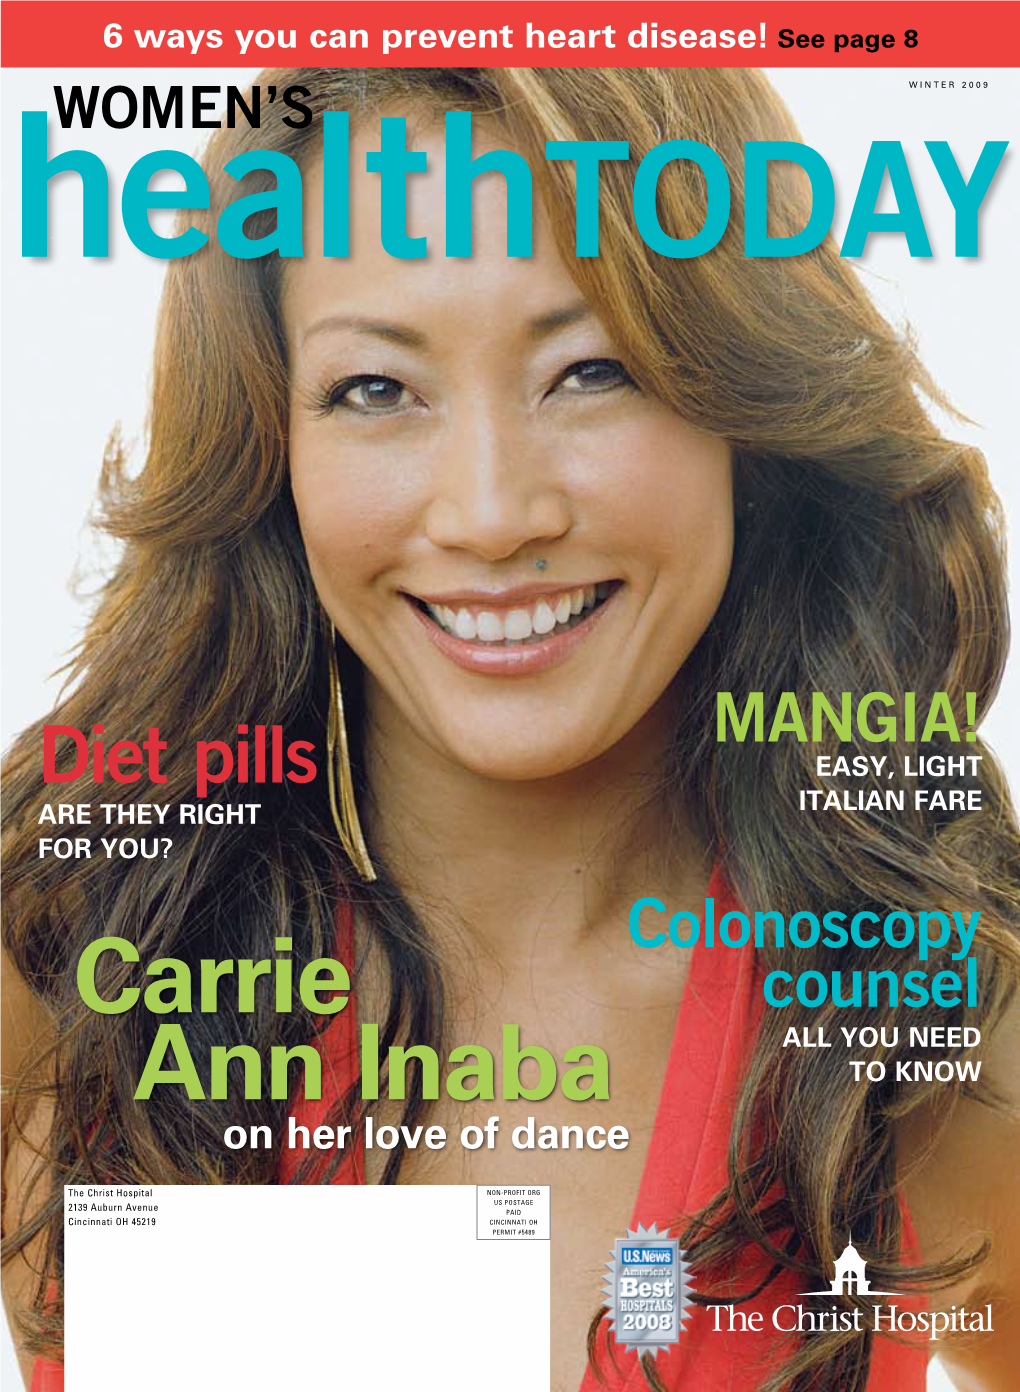 Carrie Ann Inaba Talks About Her Passion for Movement